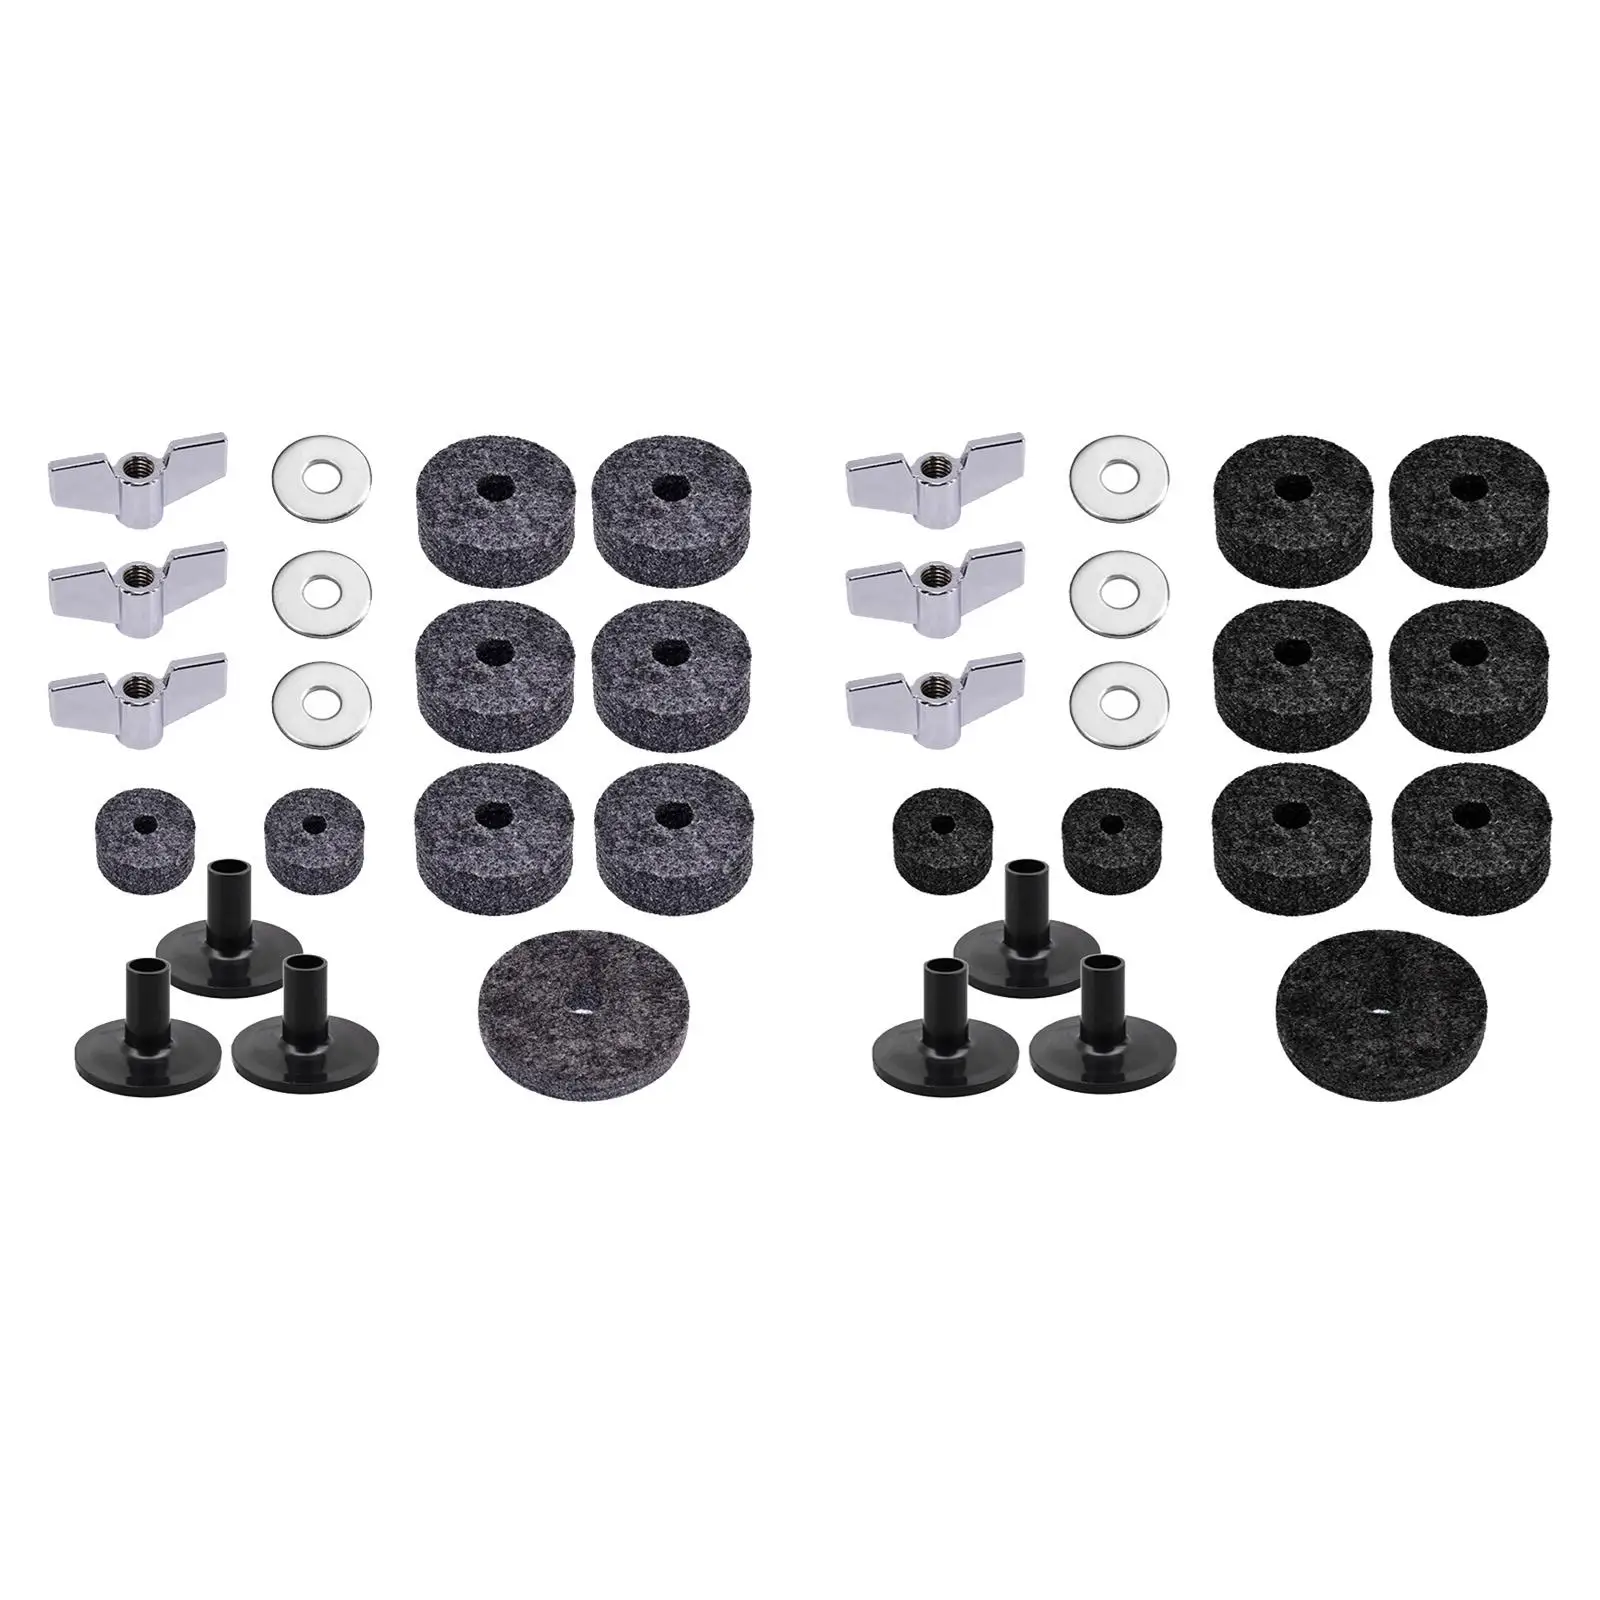 

18pcs/set Durable Drum Set Cymbal Felt Washer Cymbal Replacement Parts Drum Cymbal Accessory Instruments Musical Accessories